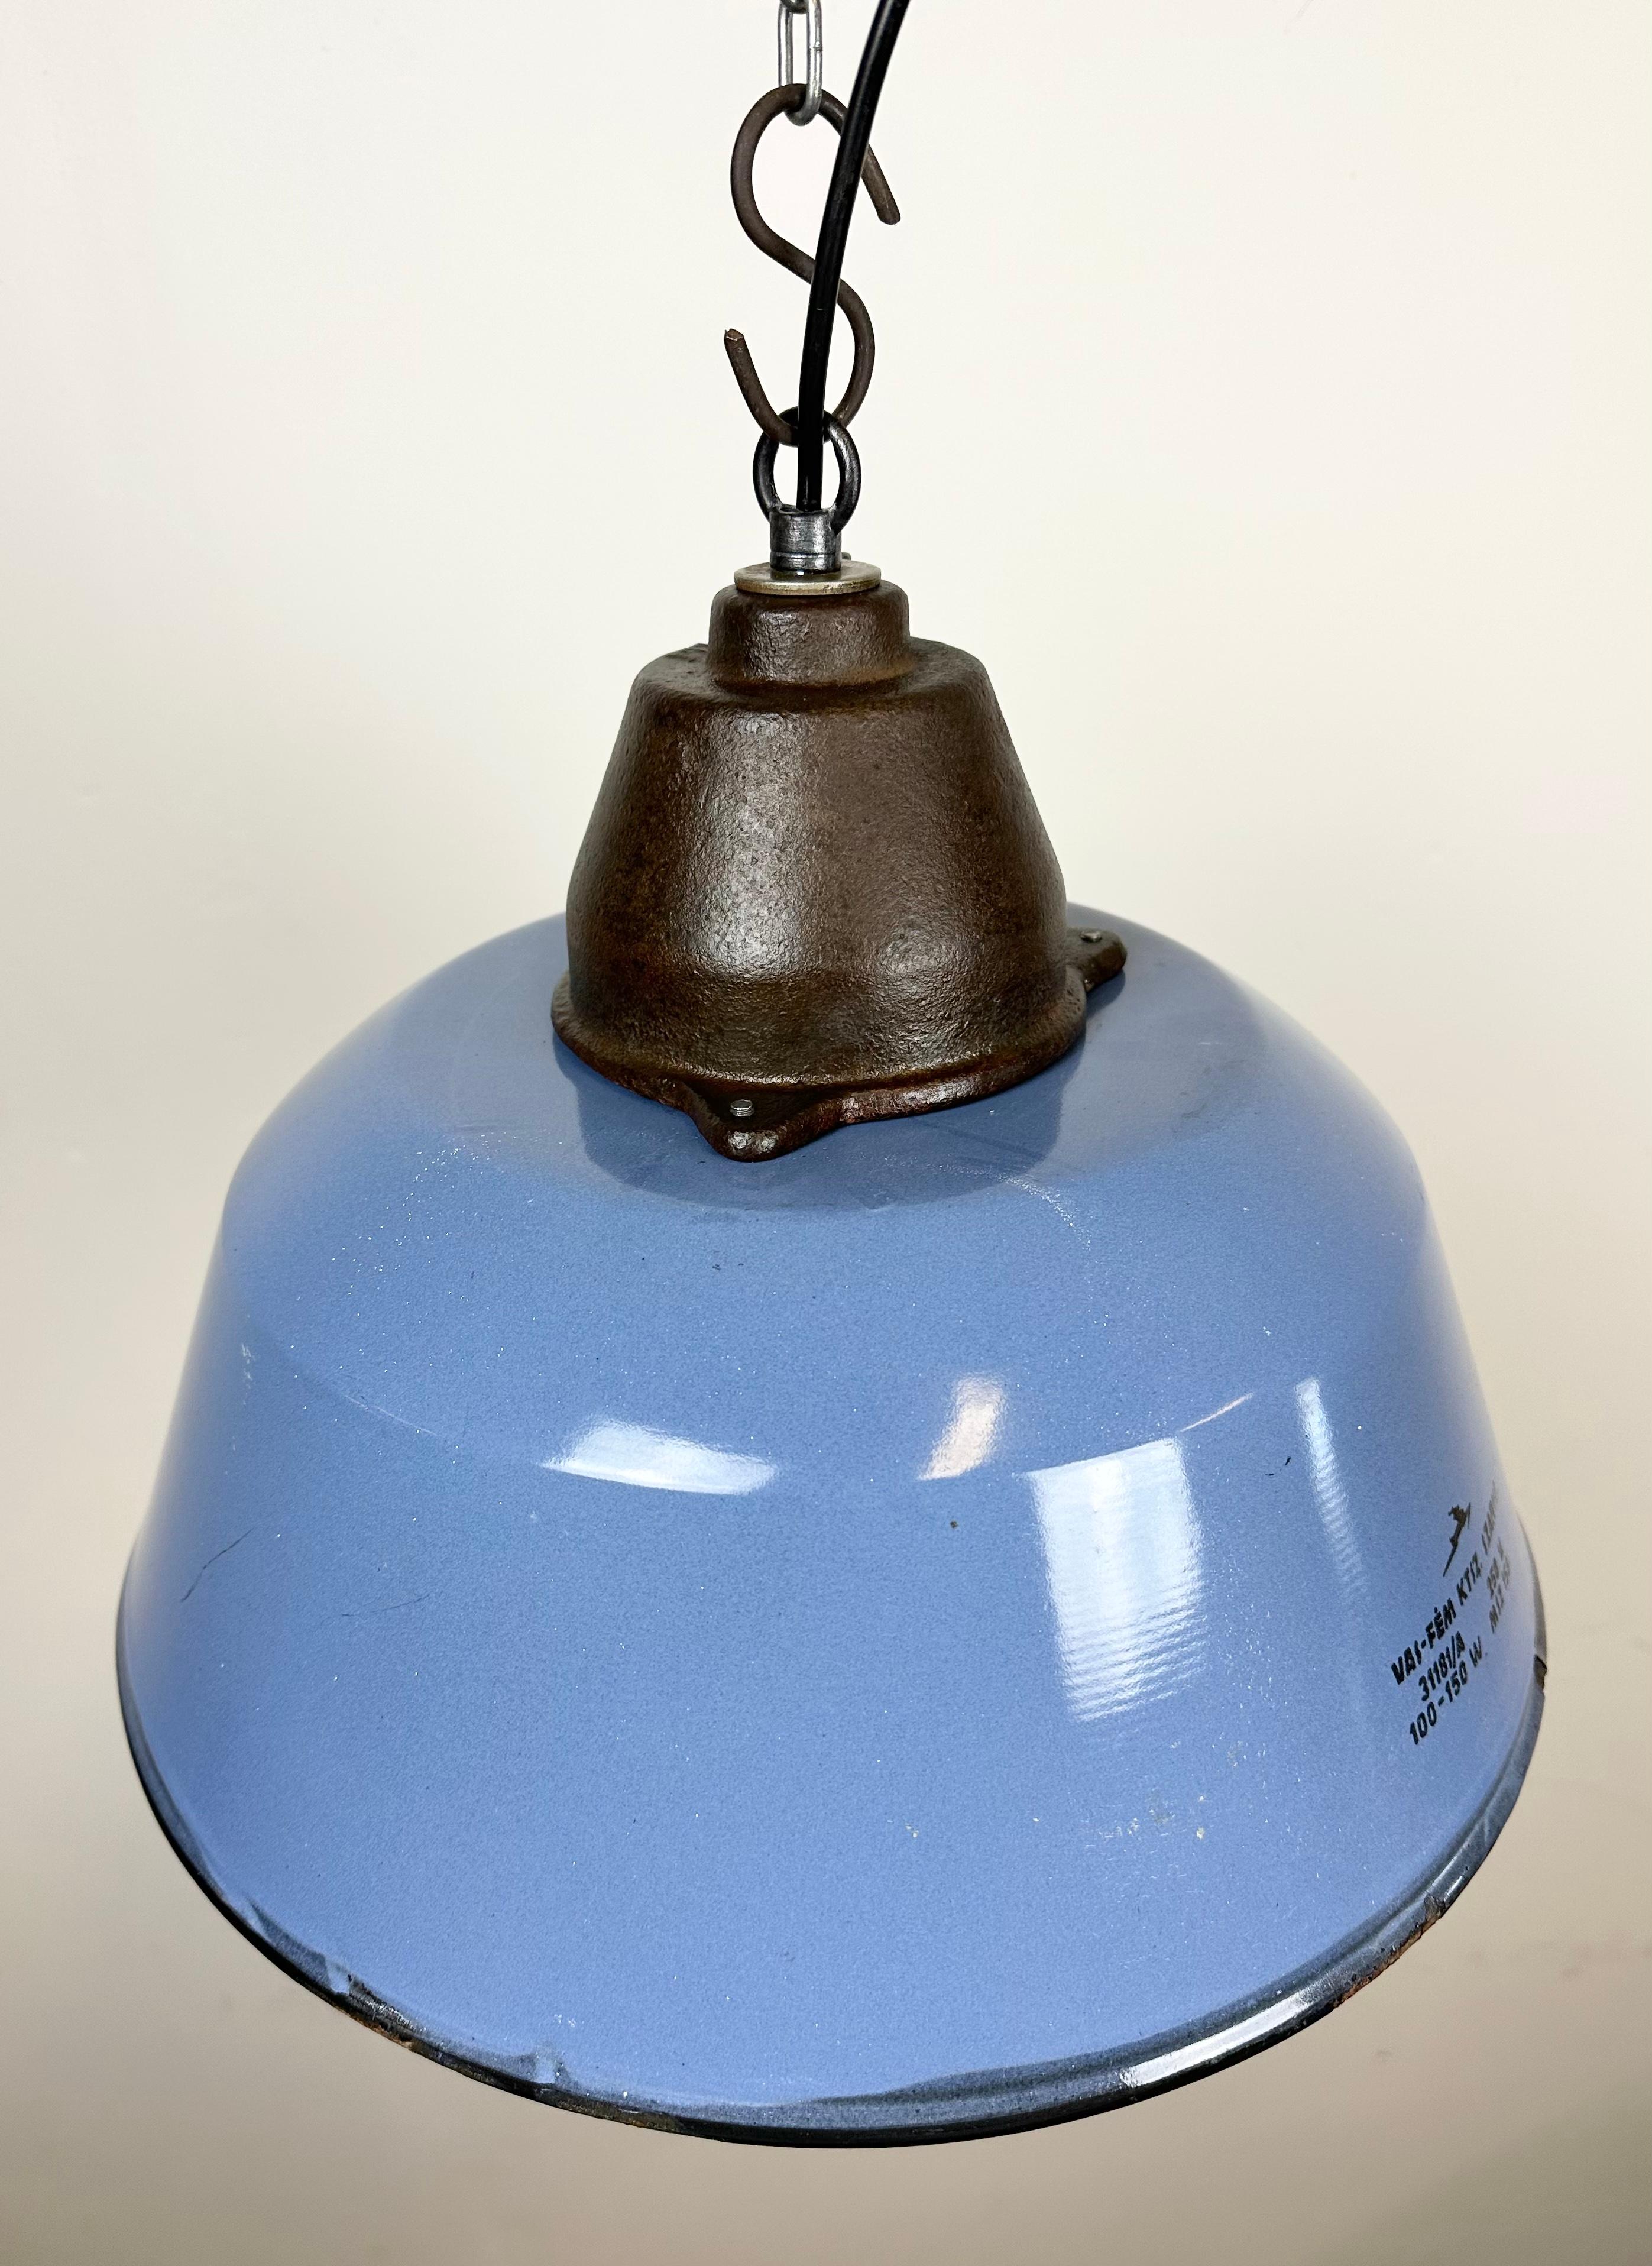 Industrial Blue Enamel and Cast Iron Pendant Light with Glass Cover, 1960s For Sale 1